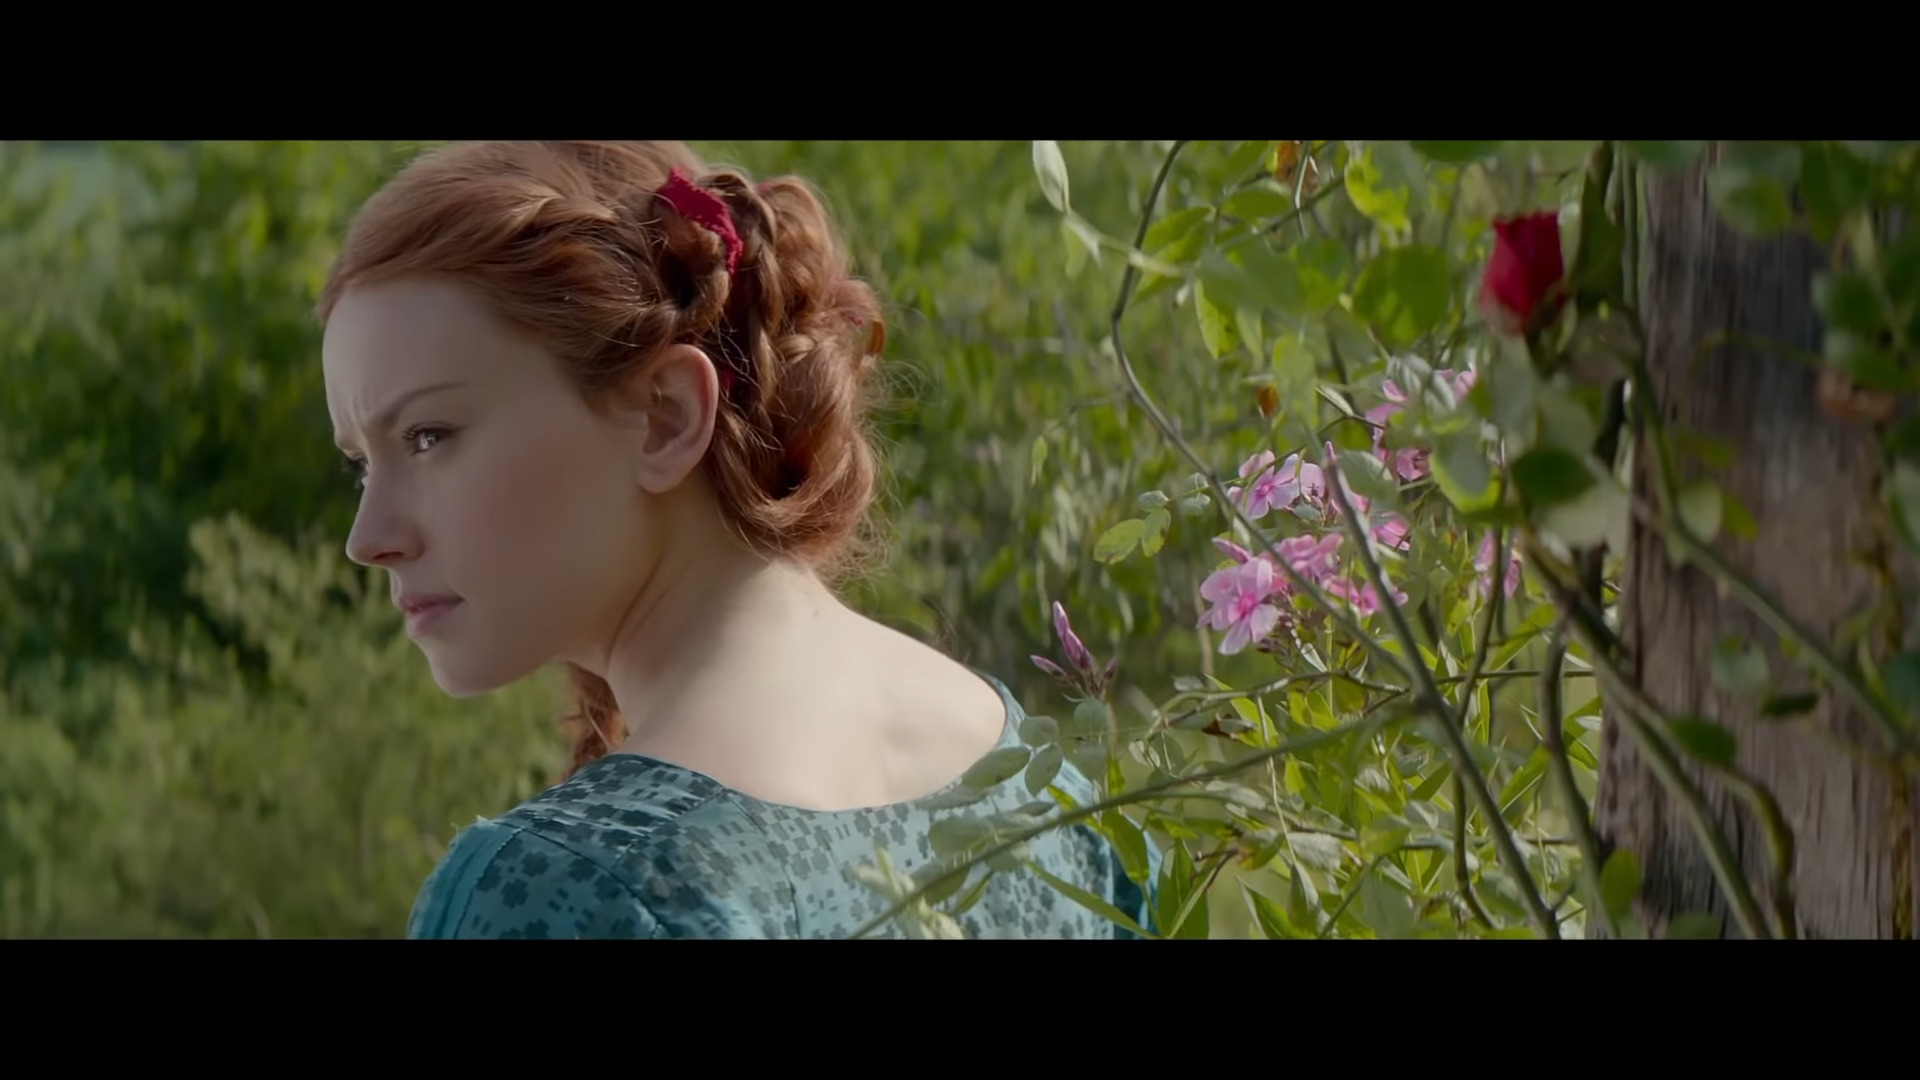 Ophelia (Daisy Ridley) takes a moment to herself in Ophelia (2018), Covert Media